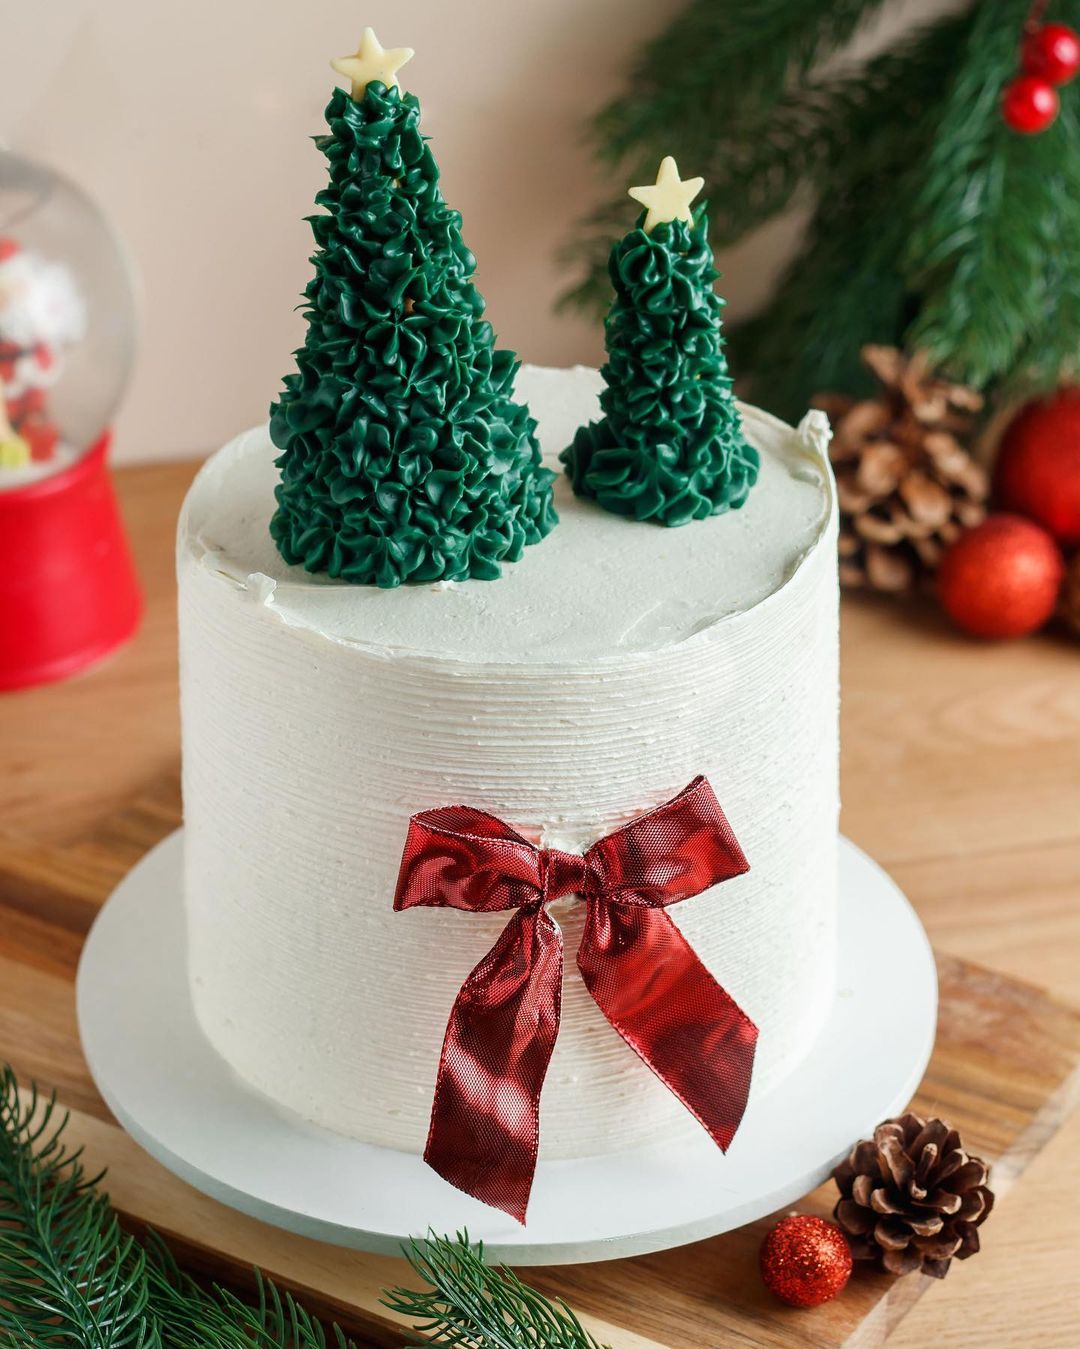 Get into the Christmas Spirit with These Easy and Fun Cake Decorating Ideas!